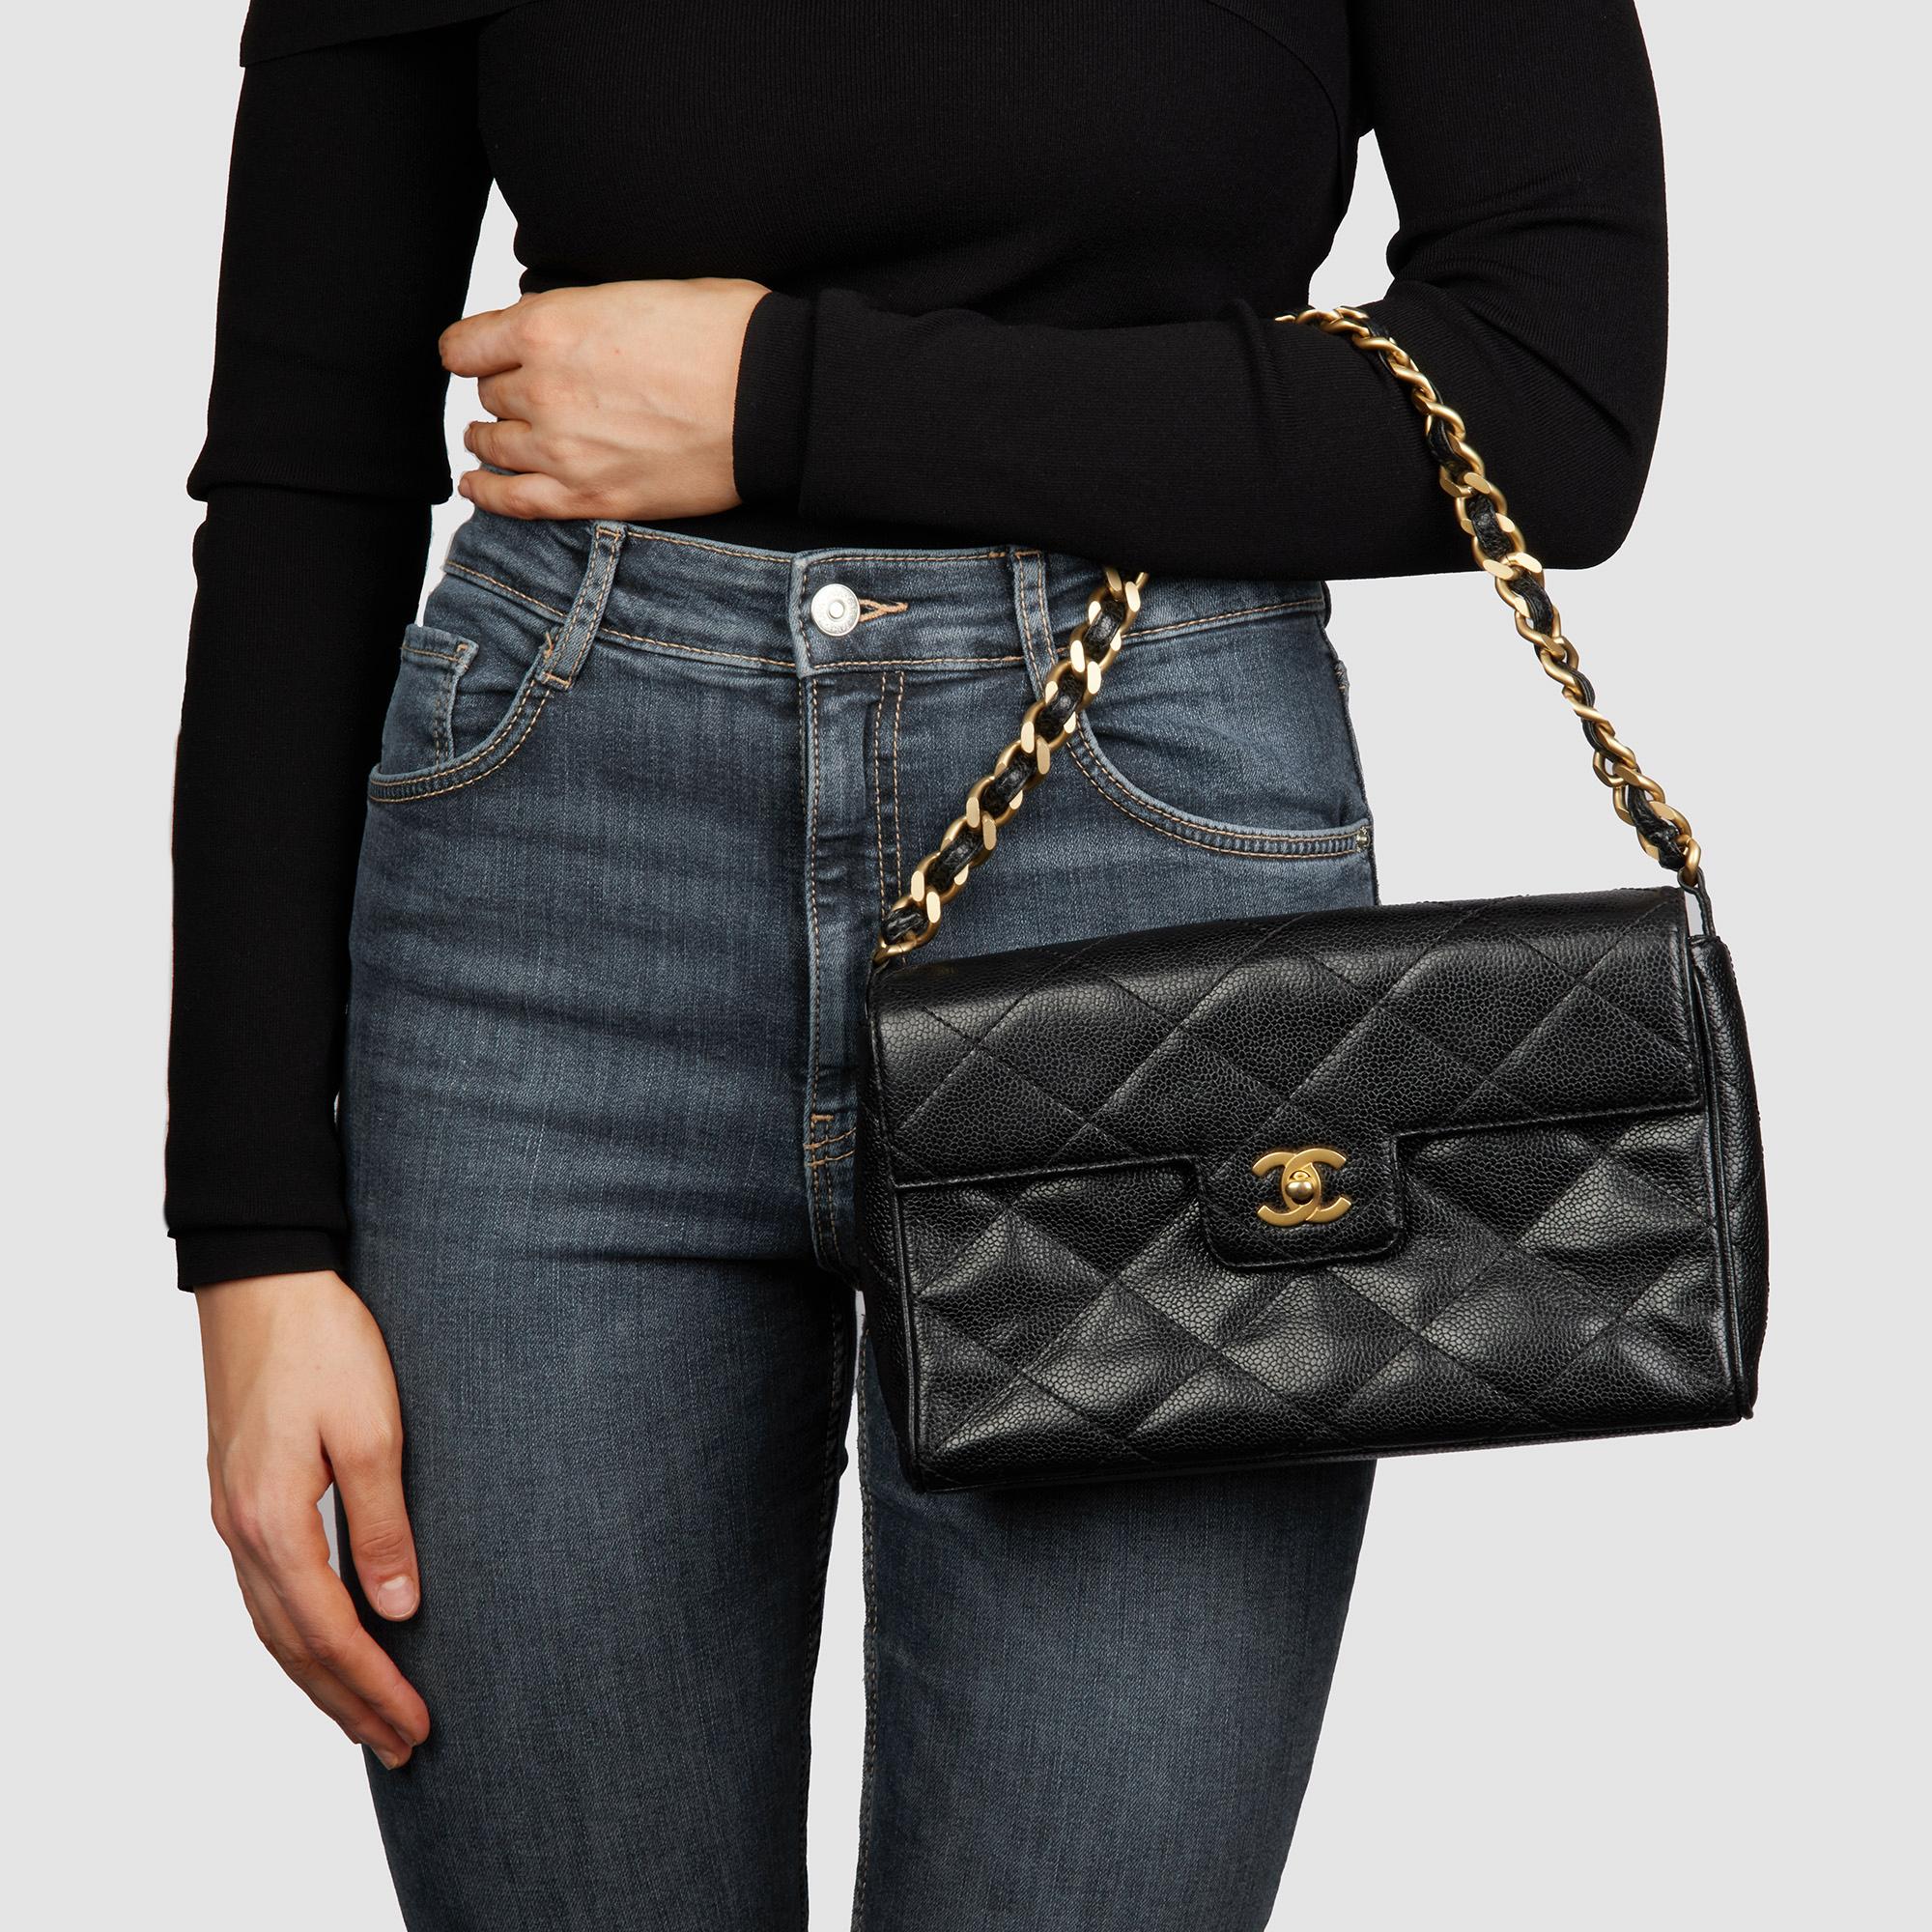 CHANEL Black Quilted Caviar Leather Vintage Medium Classic Single Flap Bag For Sale 7